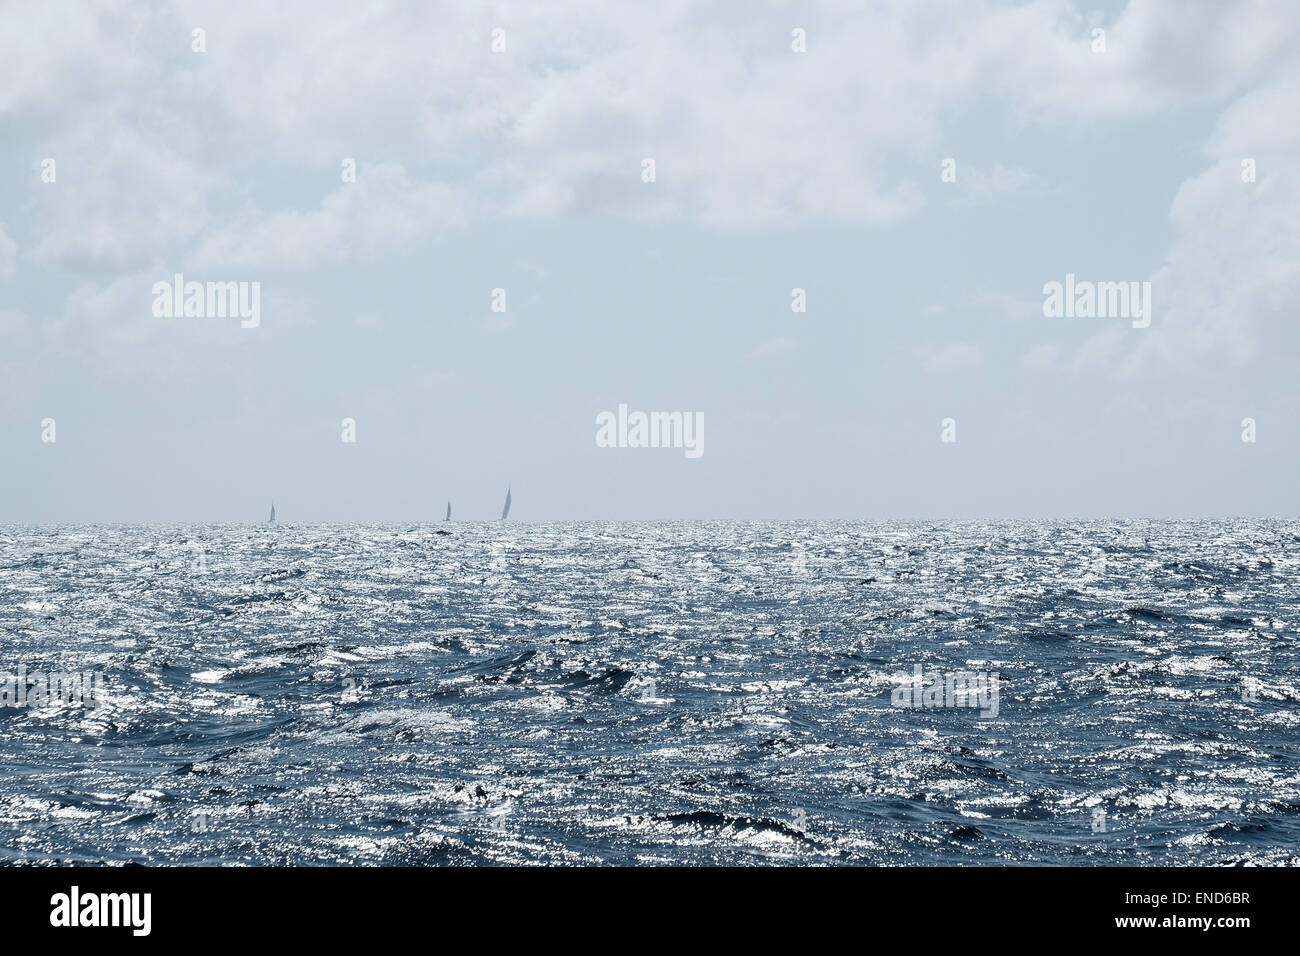 Ocean waves with several sailing yachts on the horizon Stock Photo